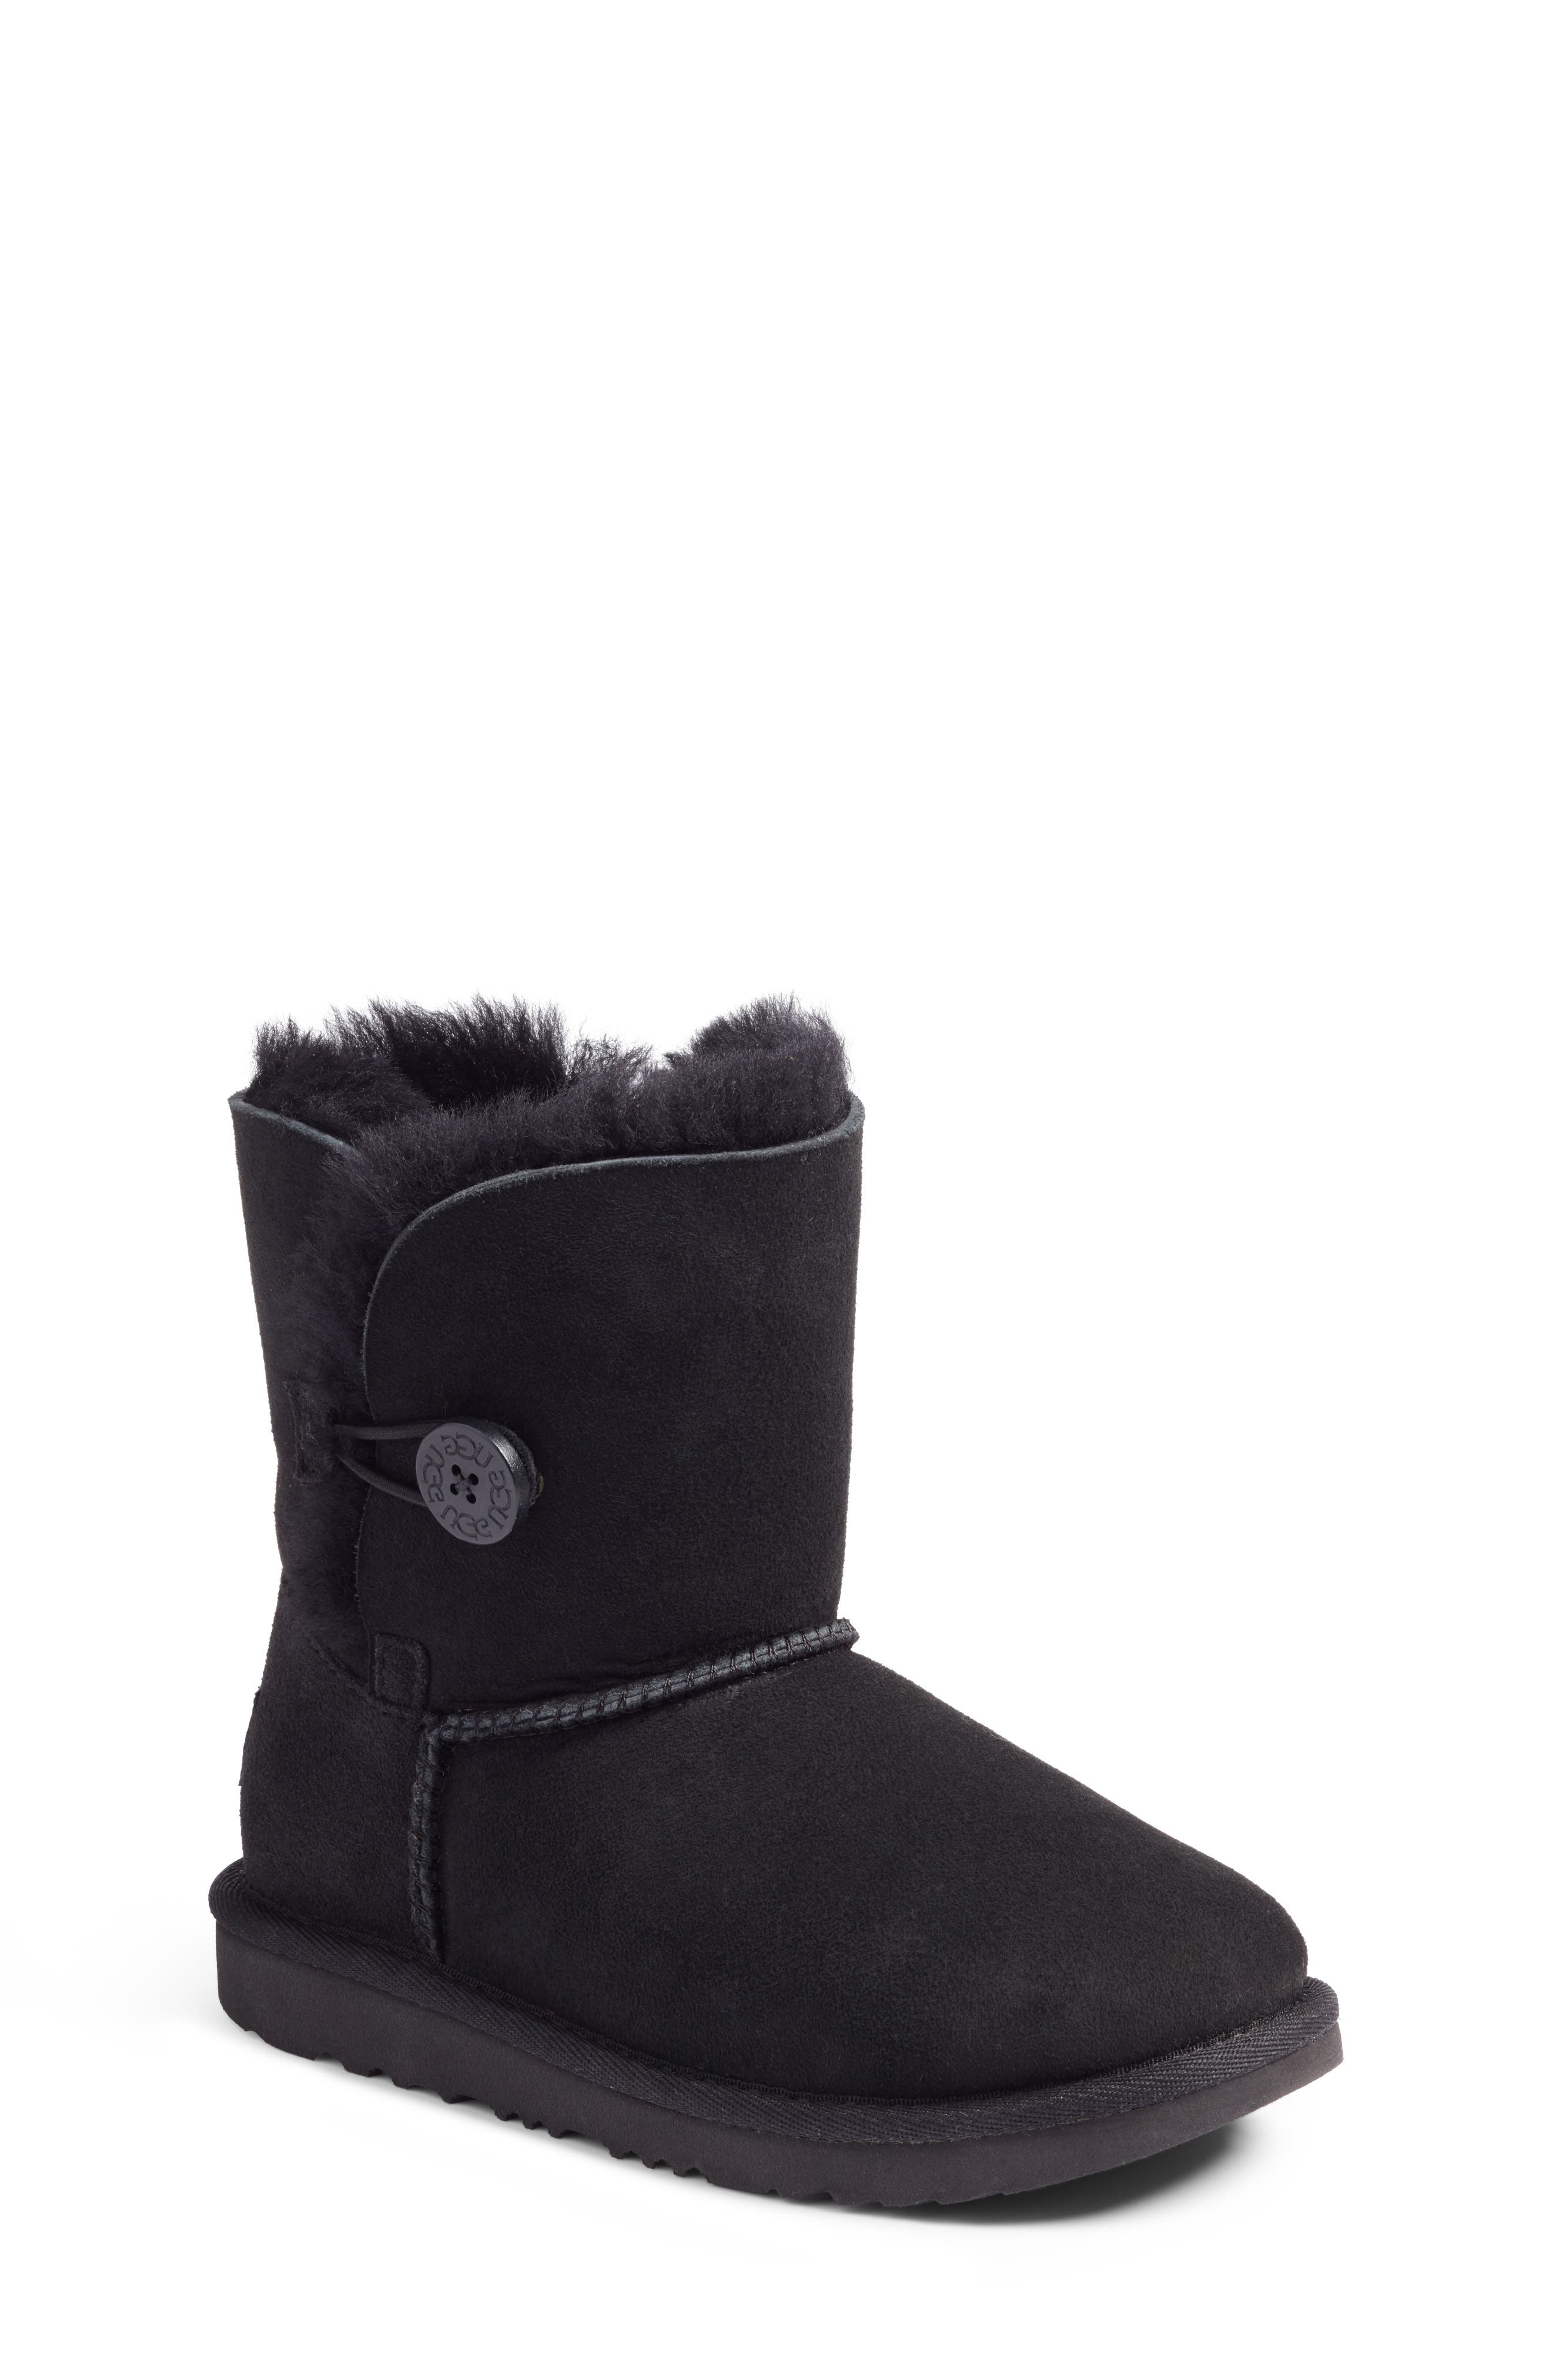 black bailey button ugg boots